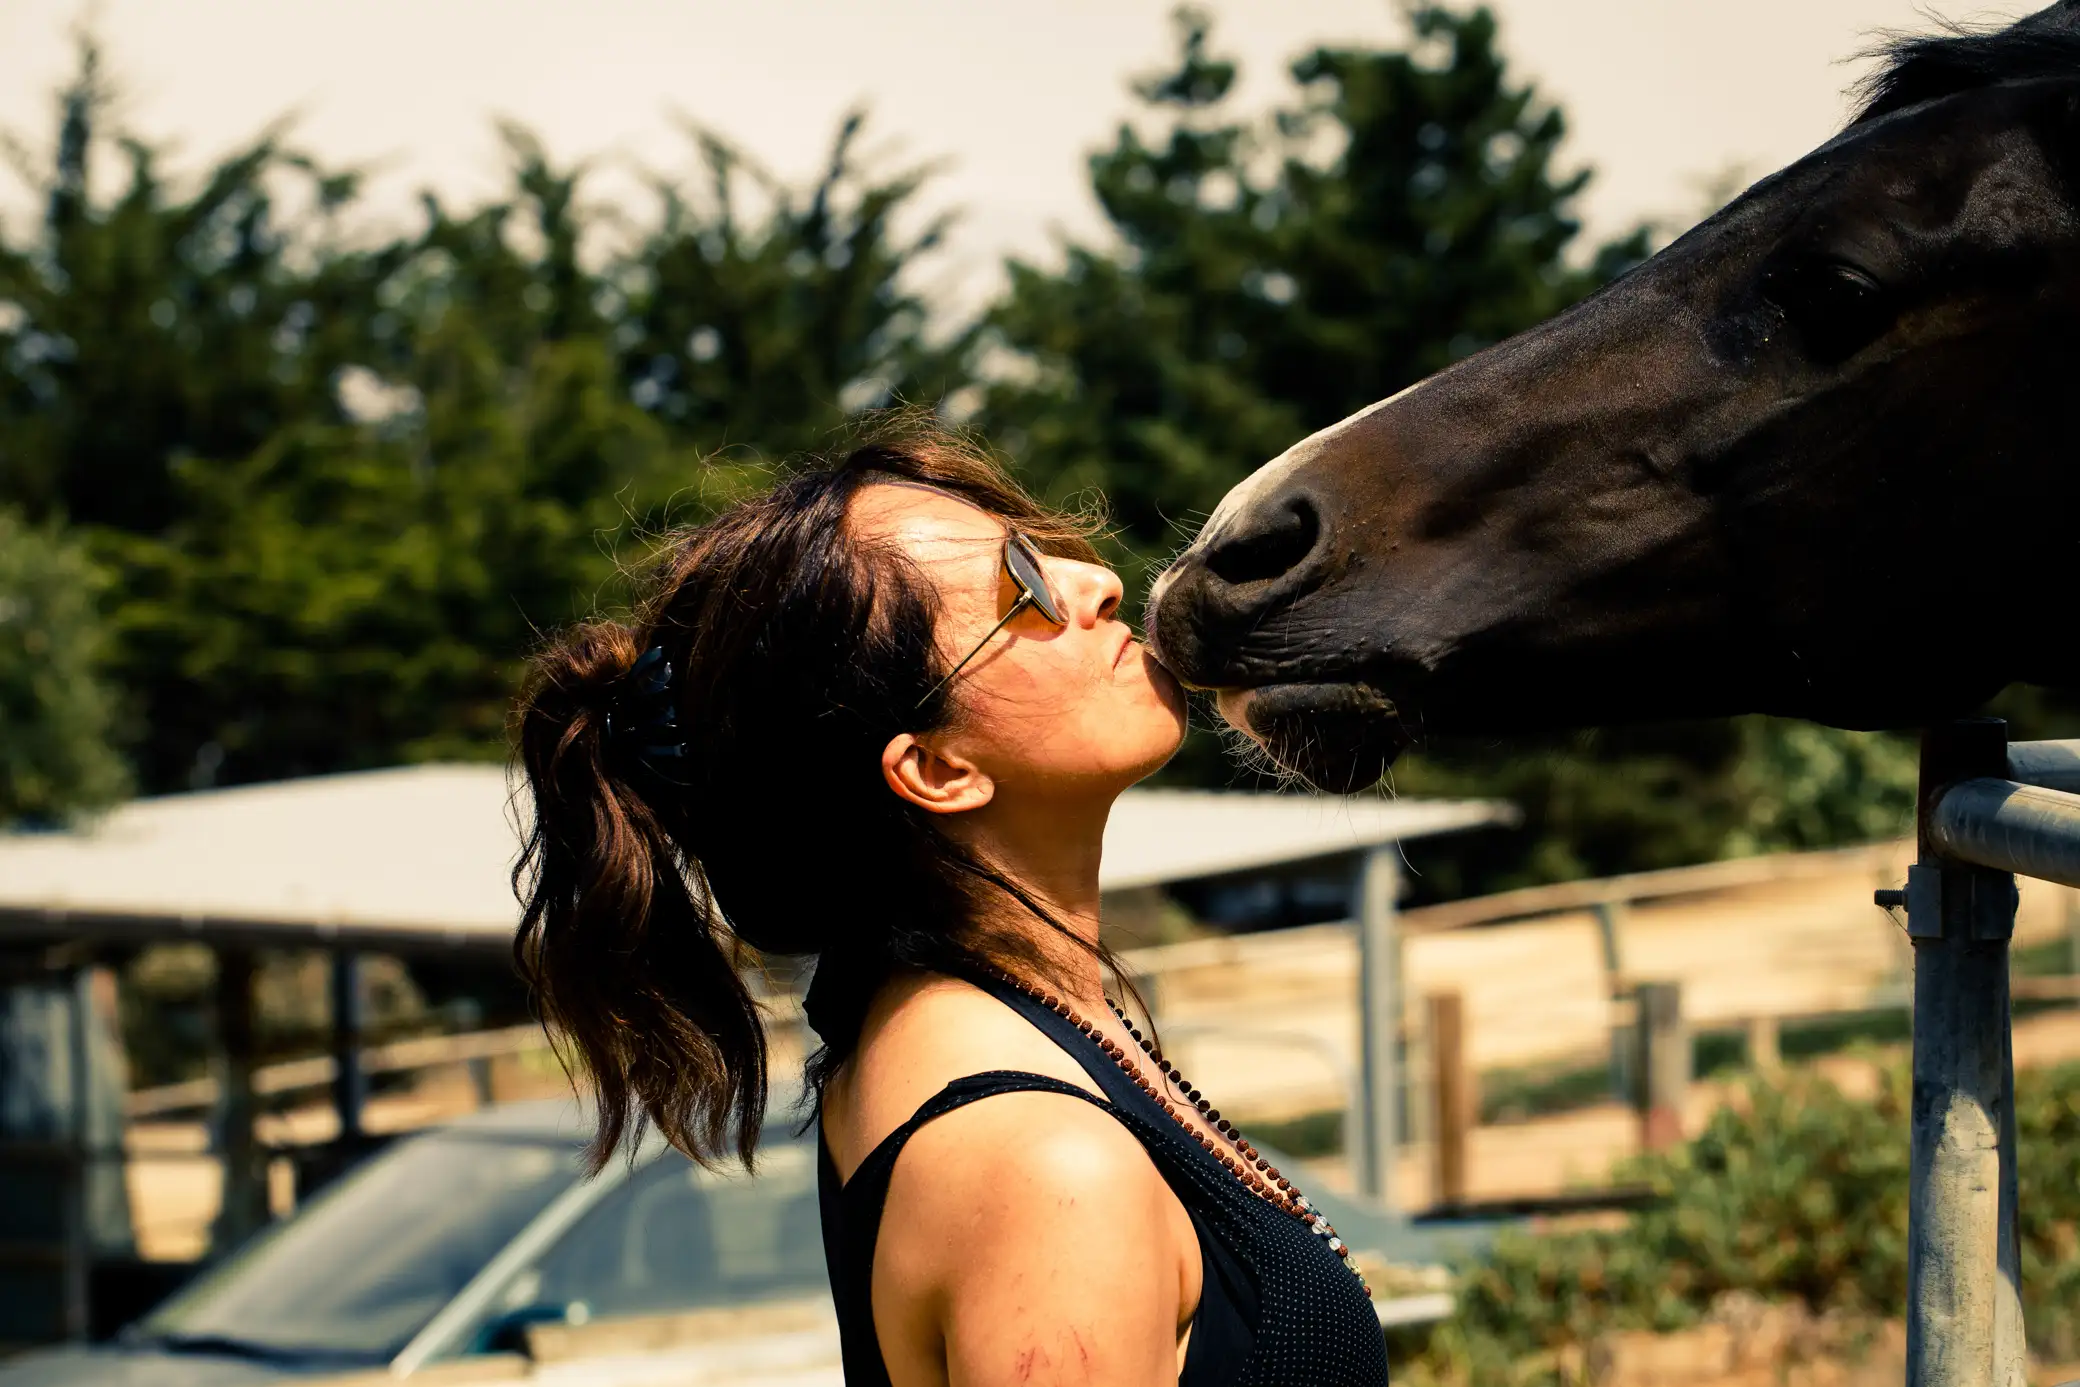 Beautiful woman playfully kissing a horse in Central Coast CA.